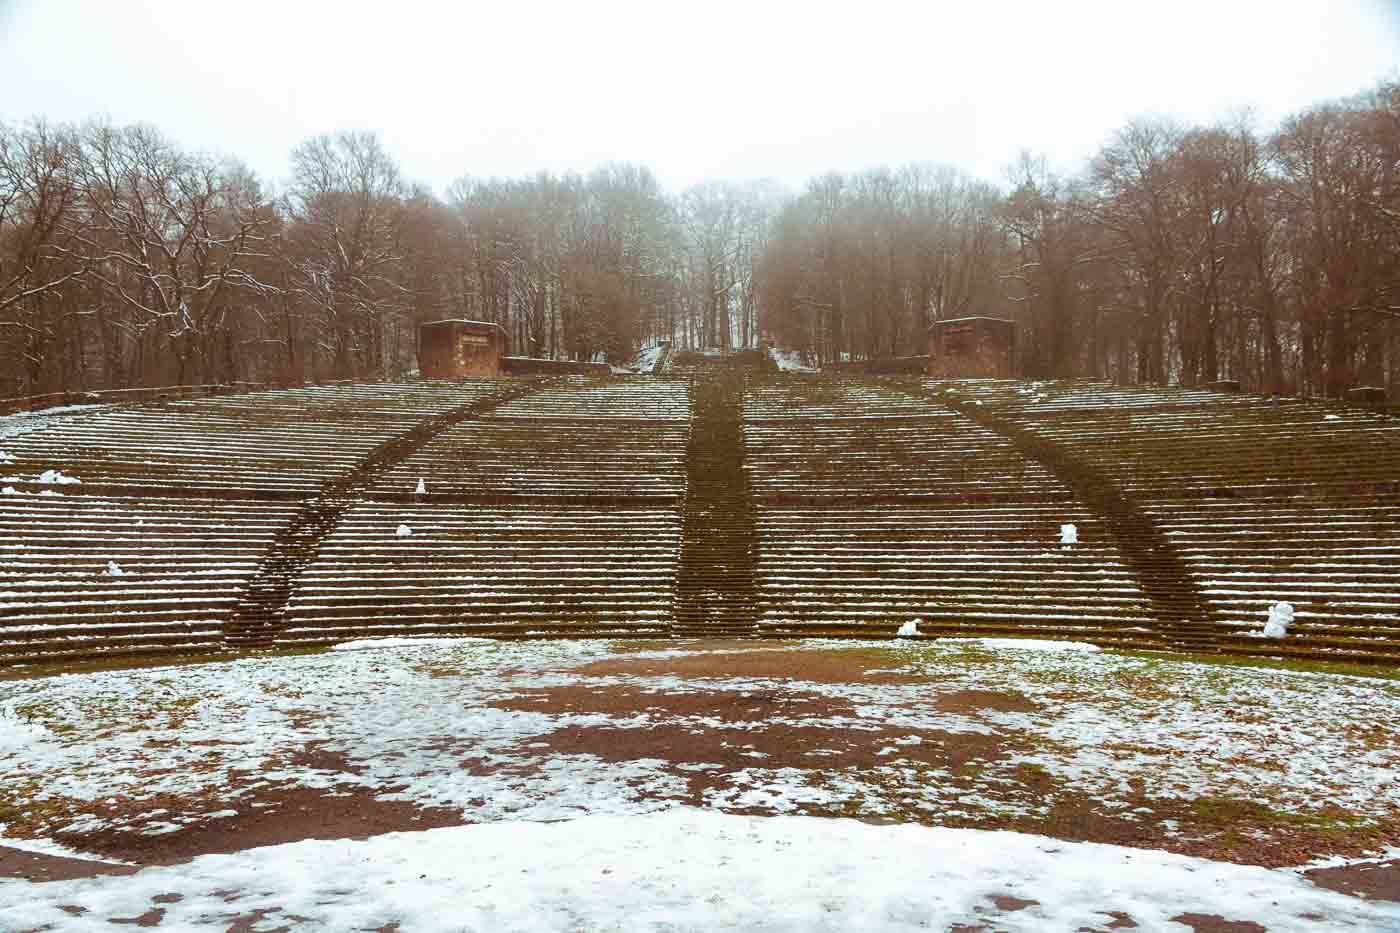 On the opposite side of the Heidelberg Castle, across the Neckar River, you need to journey to the Heiligenberg and face the Heidelberg Thingstätte, an open-air amphitheater built by the Nazis in the 1930s. 